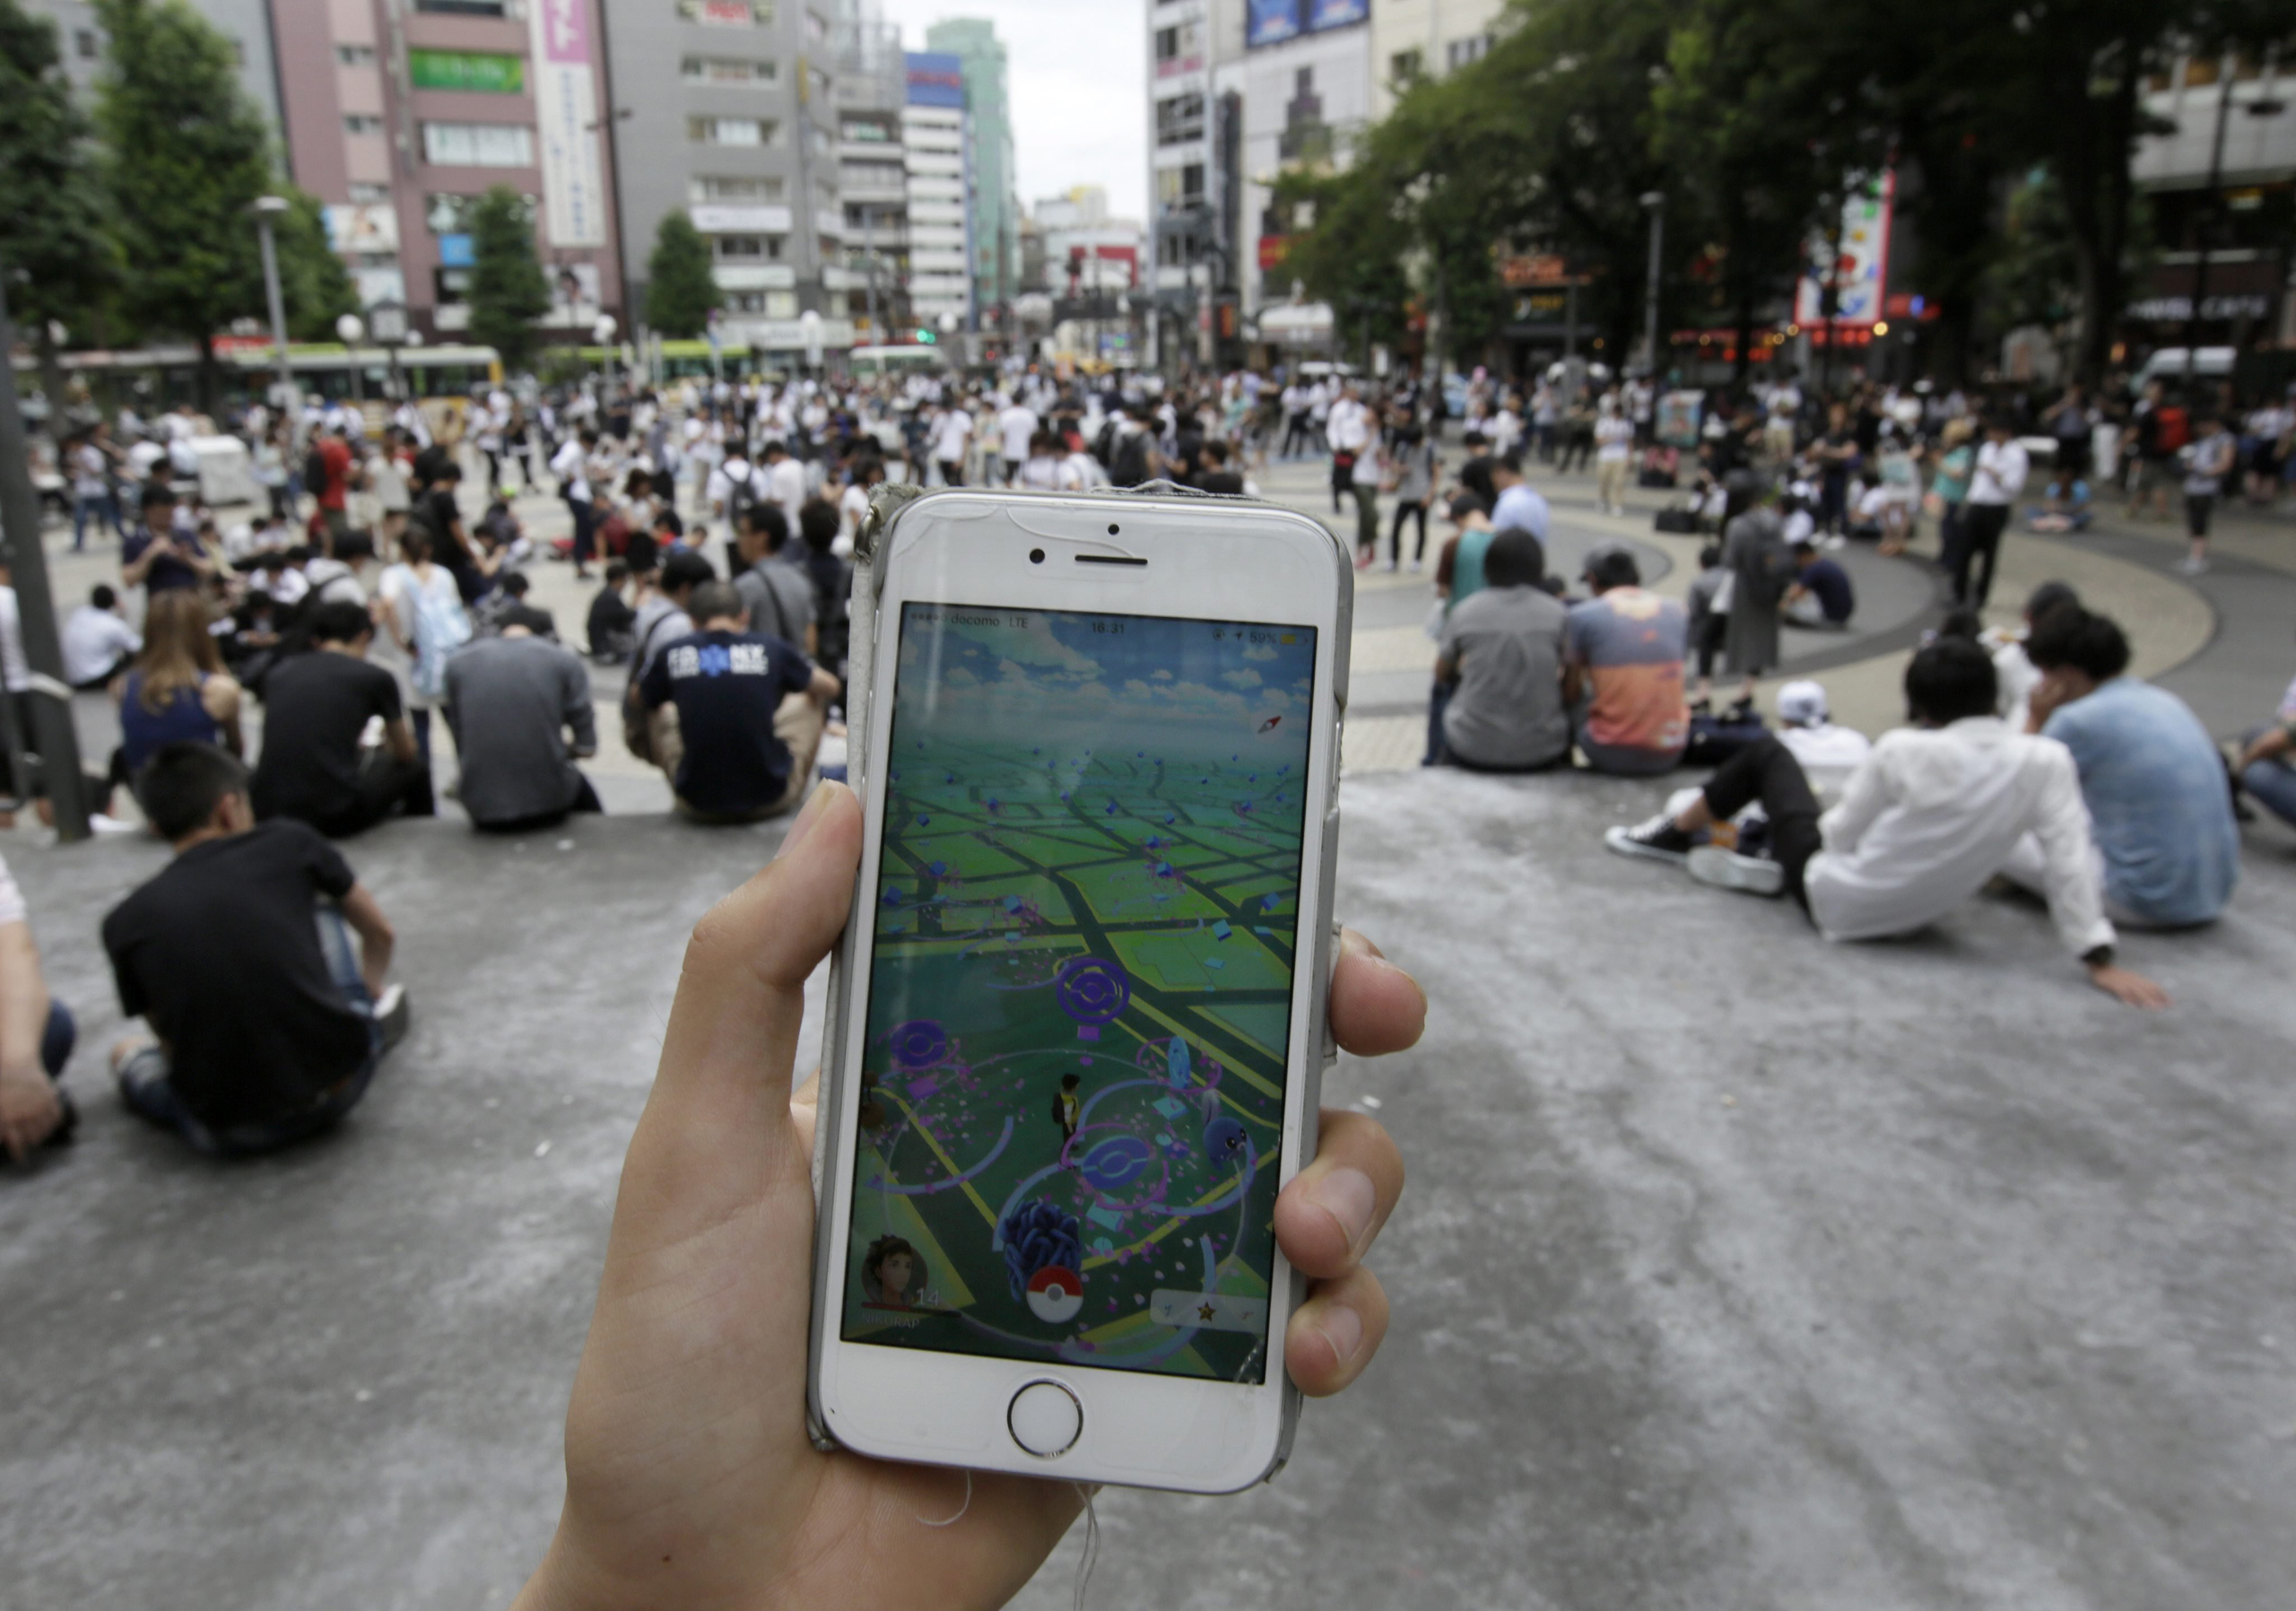 People crowd square to play Pokemon Go